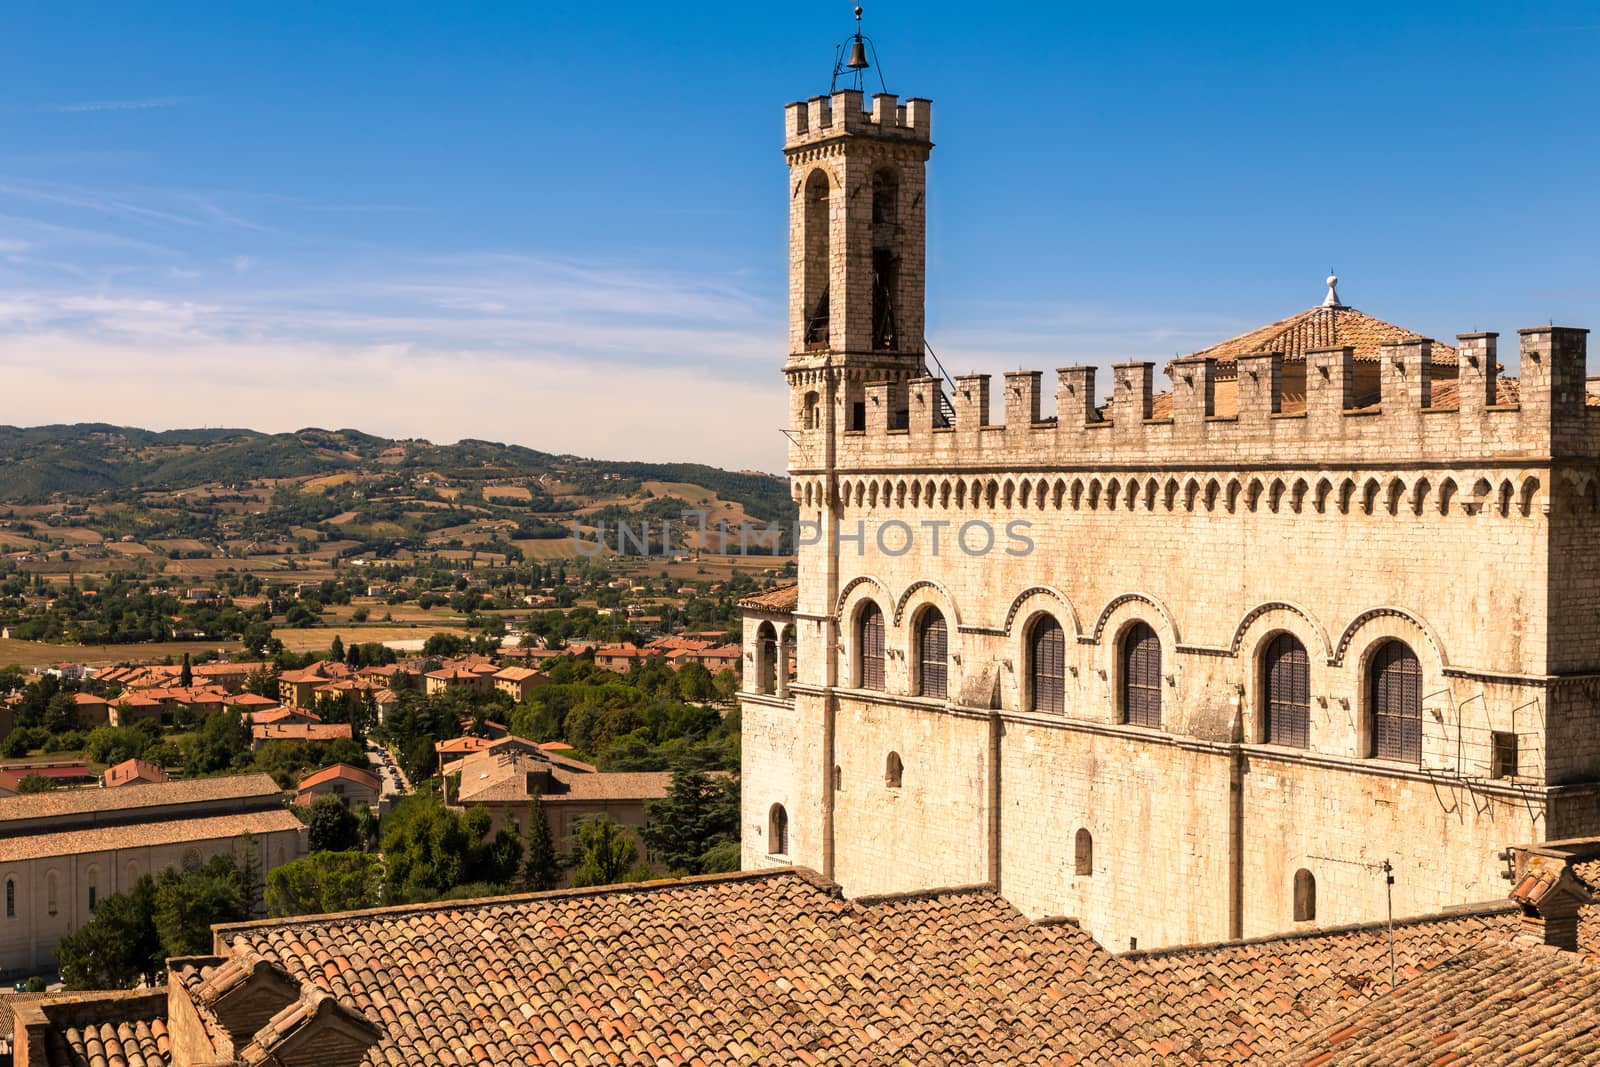 Gubbio (Italy): View of the ducal palace and view of the splendid Italian roofs